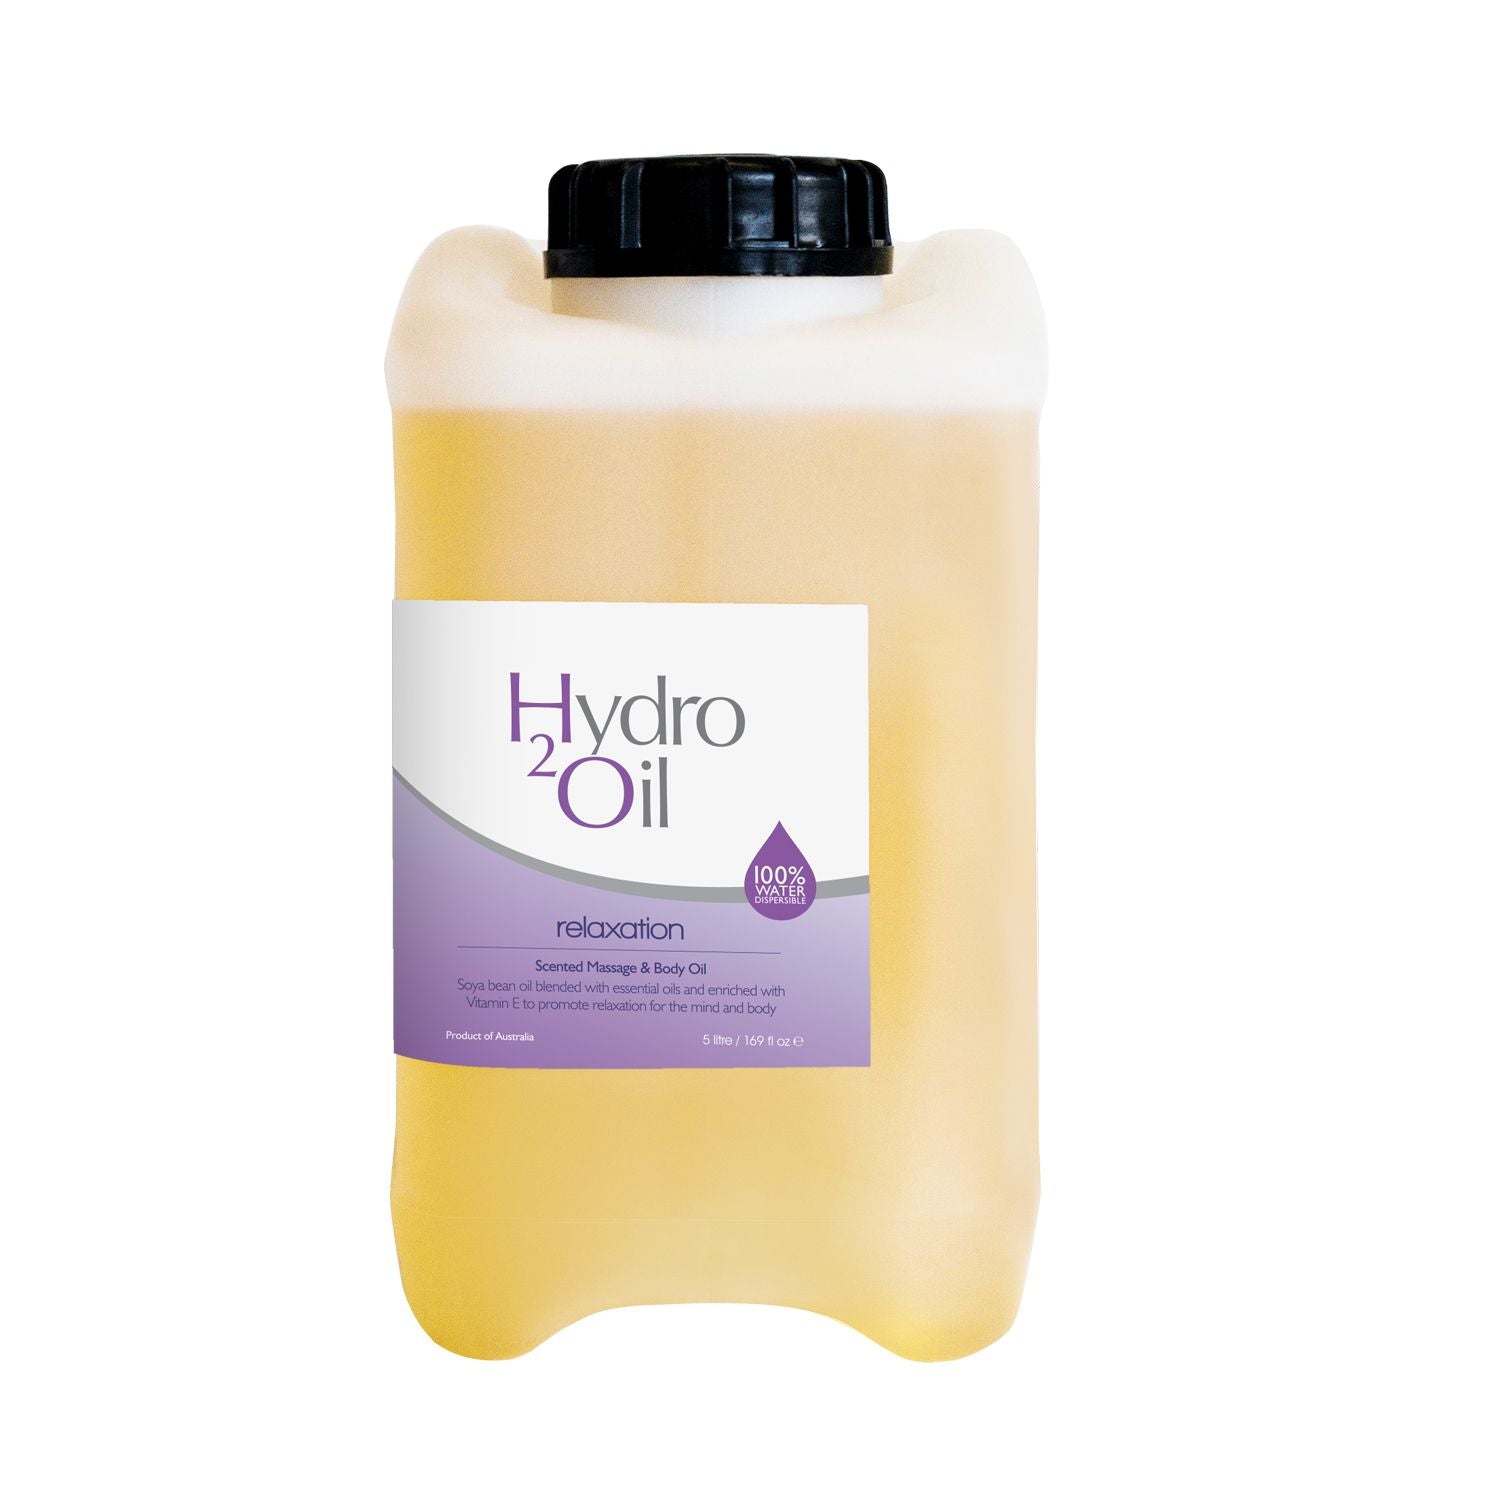 Hydro 2 Oil - Relaxation - with pouring tap 5L